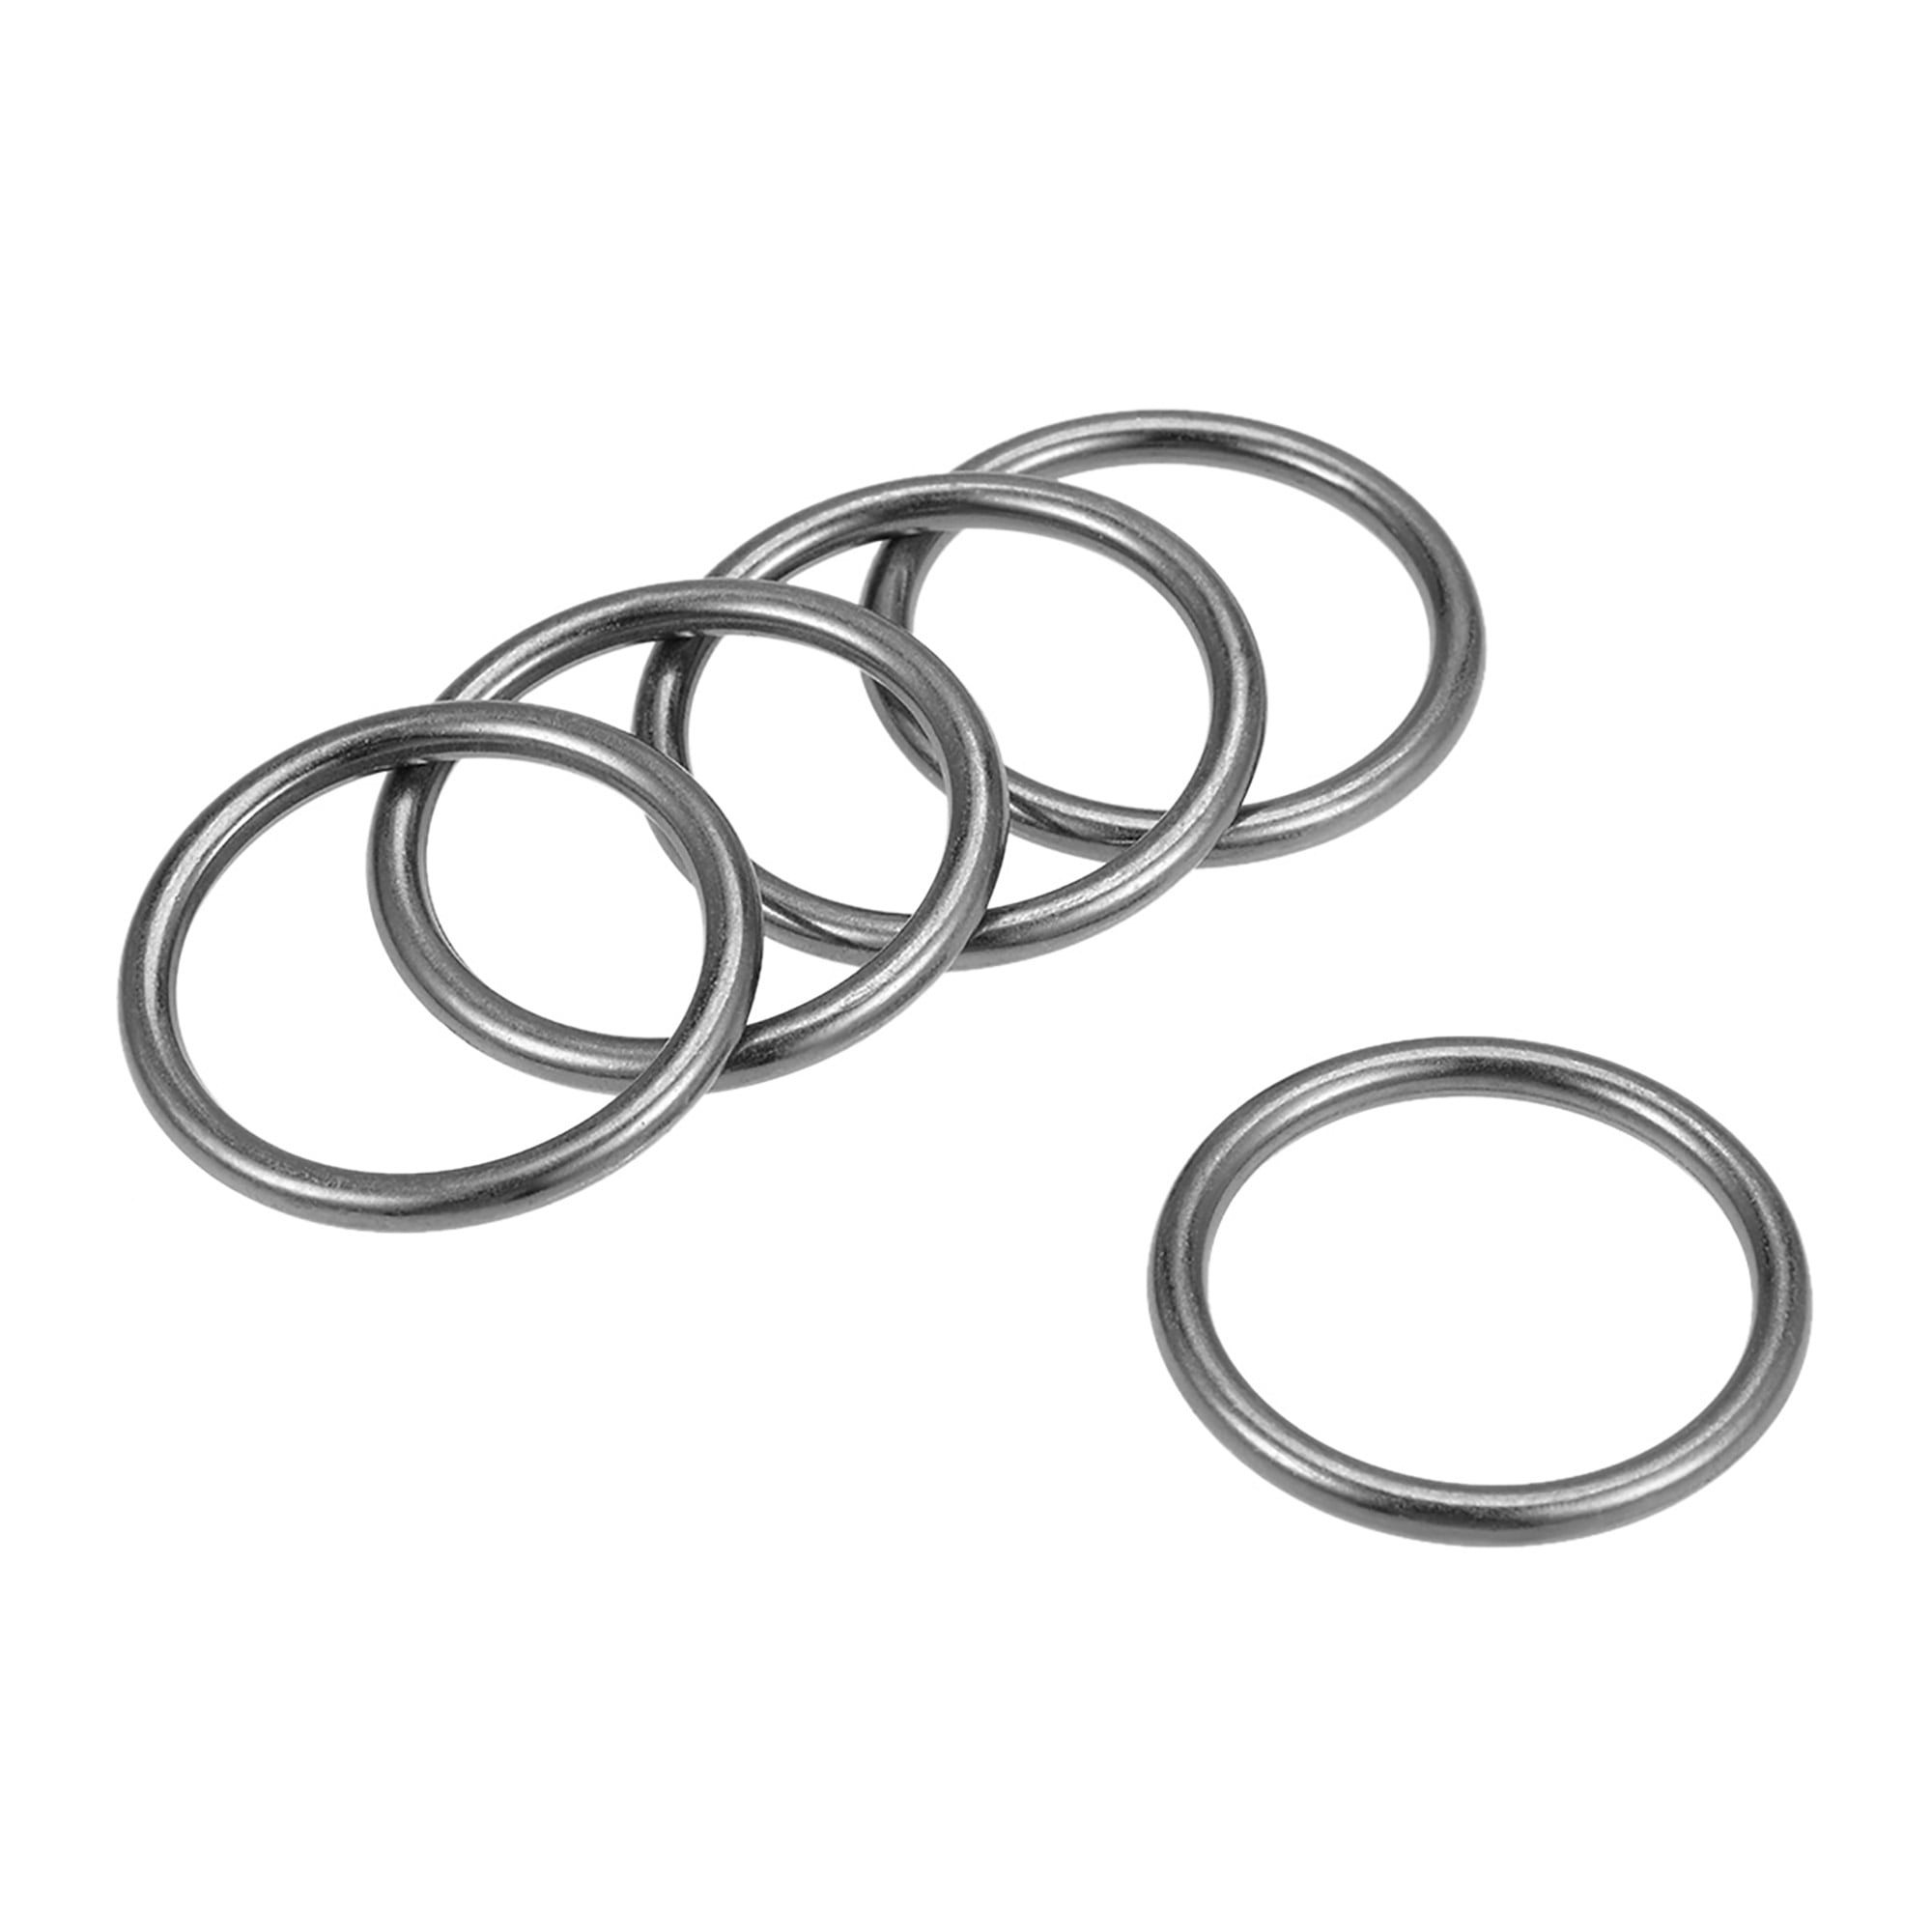 5Pcs O Ring Buckle 1-Inch(25mm) Zinc Alloy O-Rings Black for Hardware ...